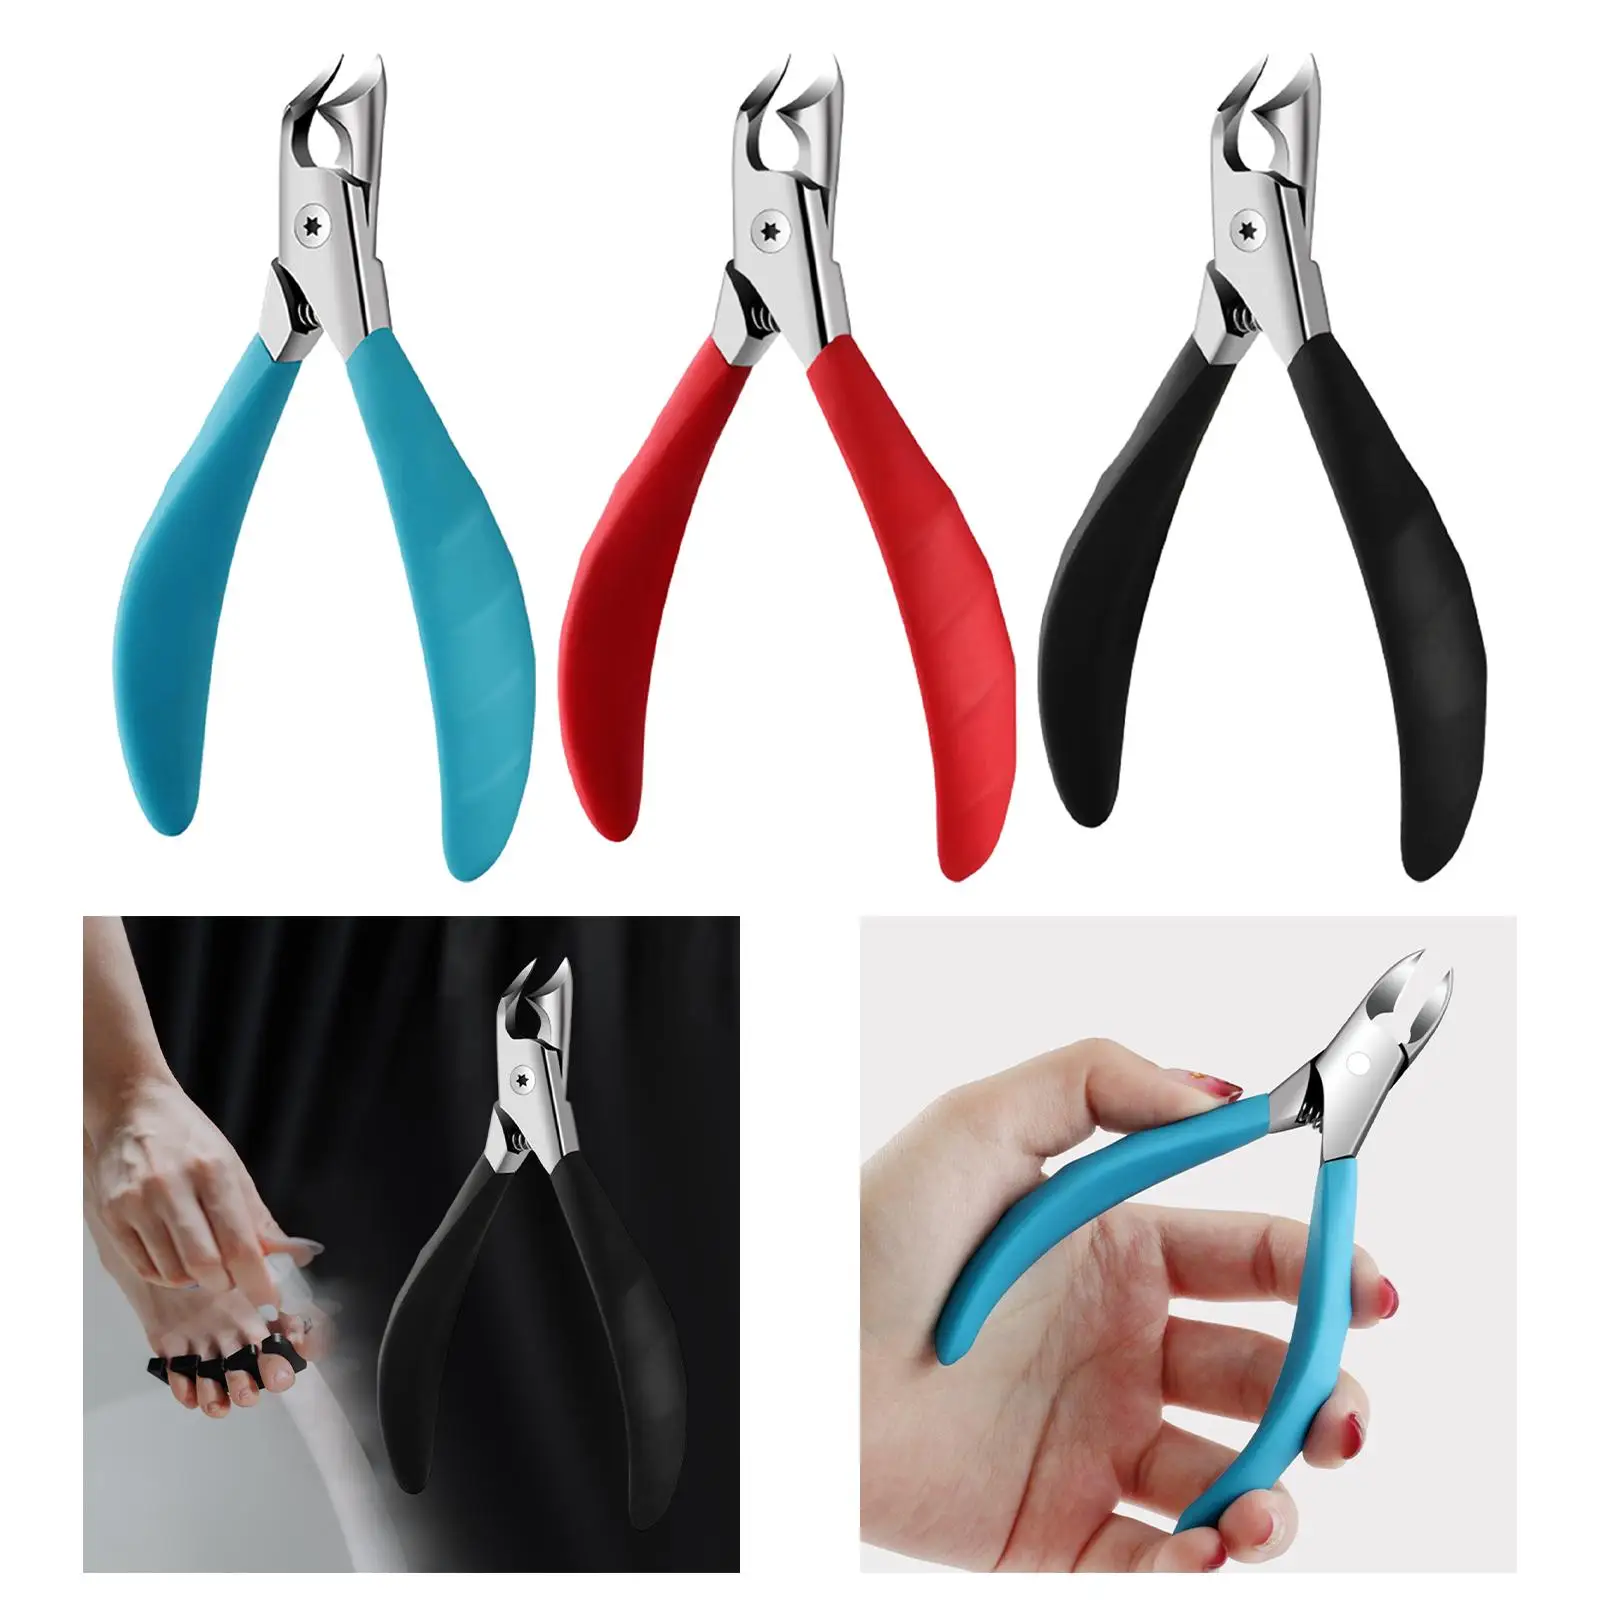 Toenail Clippers Multifunctional Heavy Duty Durable for Thick Hard Nails Salon Dead Skins